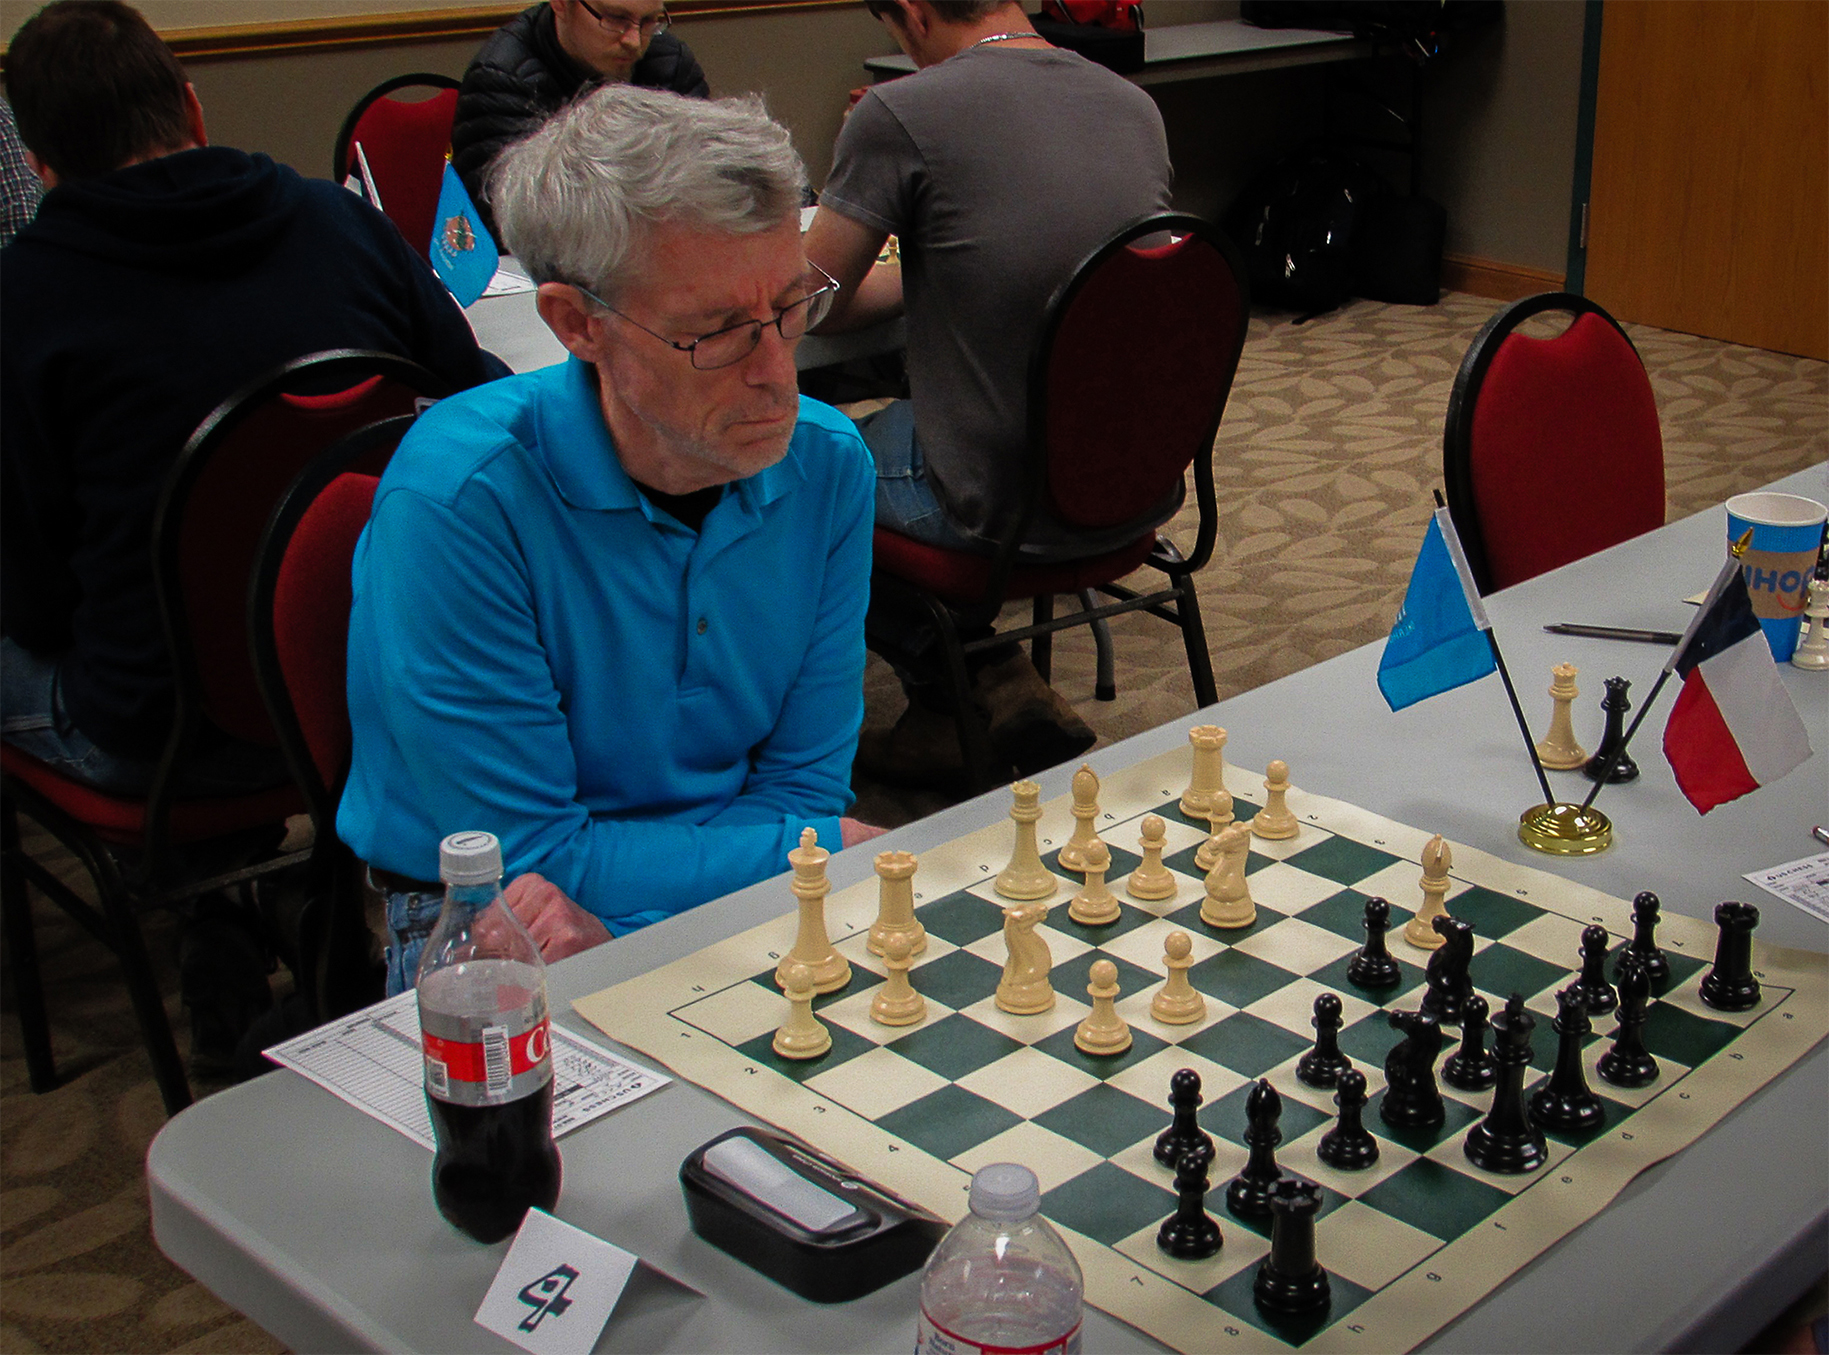 Rookie Harold Brown played a close match on Board 4.  He is a Club Tournament Director, US Chess Life Member and hails from Tulsa.  He is ranked in the 94th Percentile for all USA chess players and in the 87th Percentile for USA Seniors.  He is ranked Number 23 in Oklahoma.  Photo by Mike Tubbs.